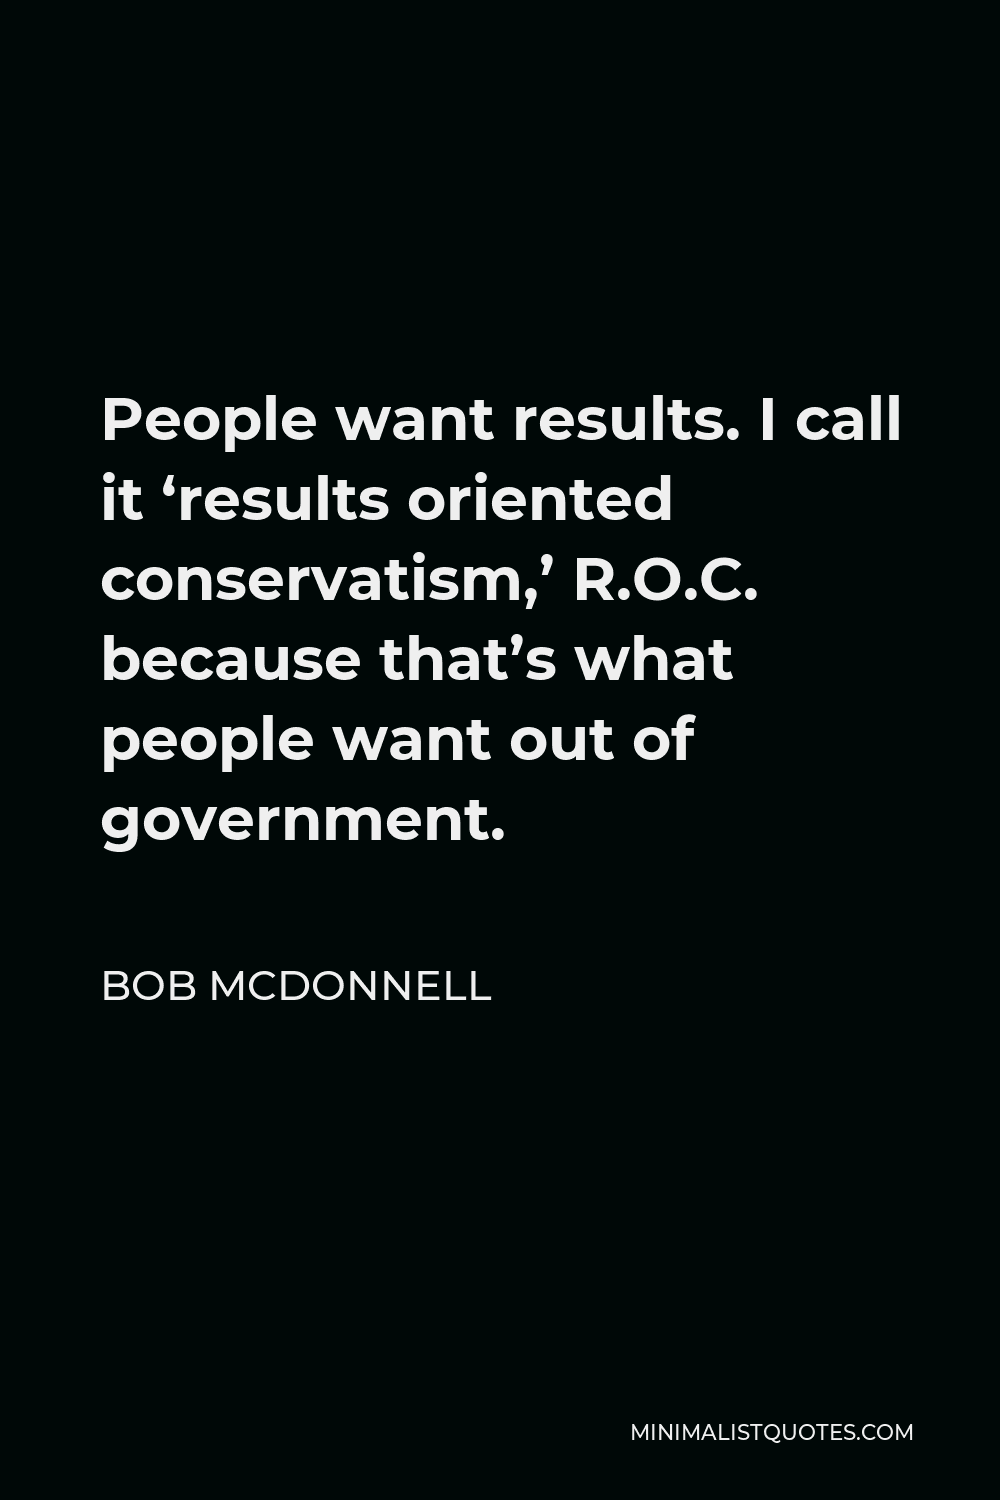 Bob McDonnell Quote - People want results. I call it ‘results oriented conservatism,’ R.O.C. because that’s what people want out of government.